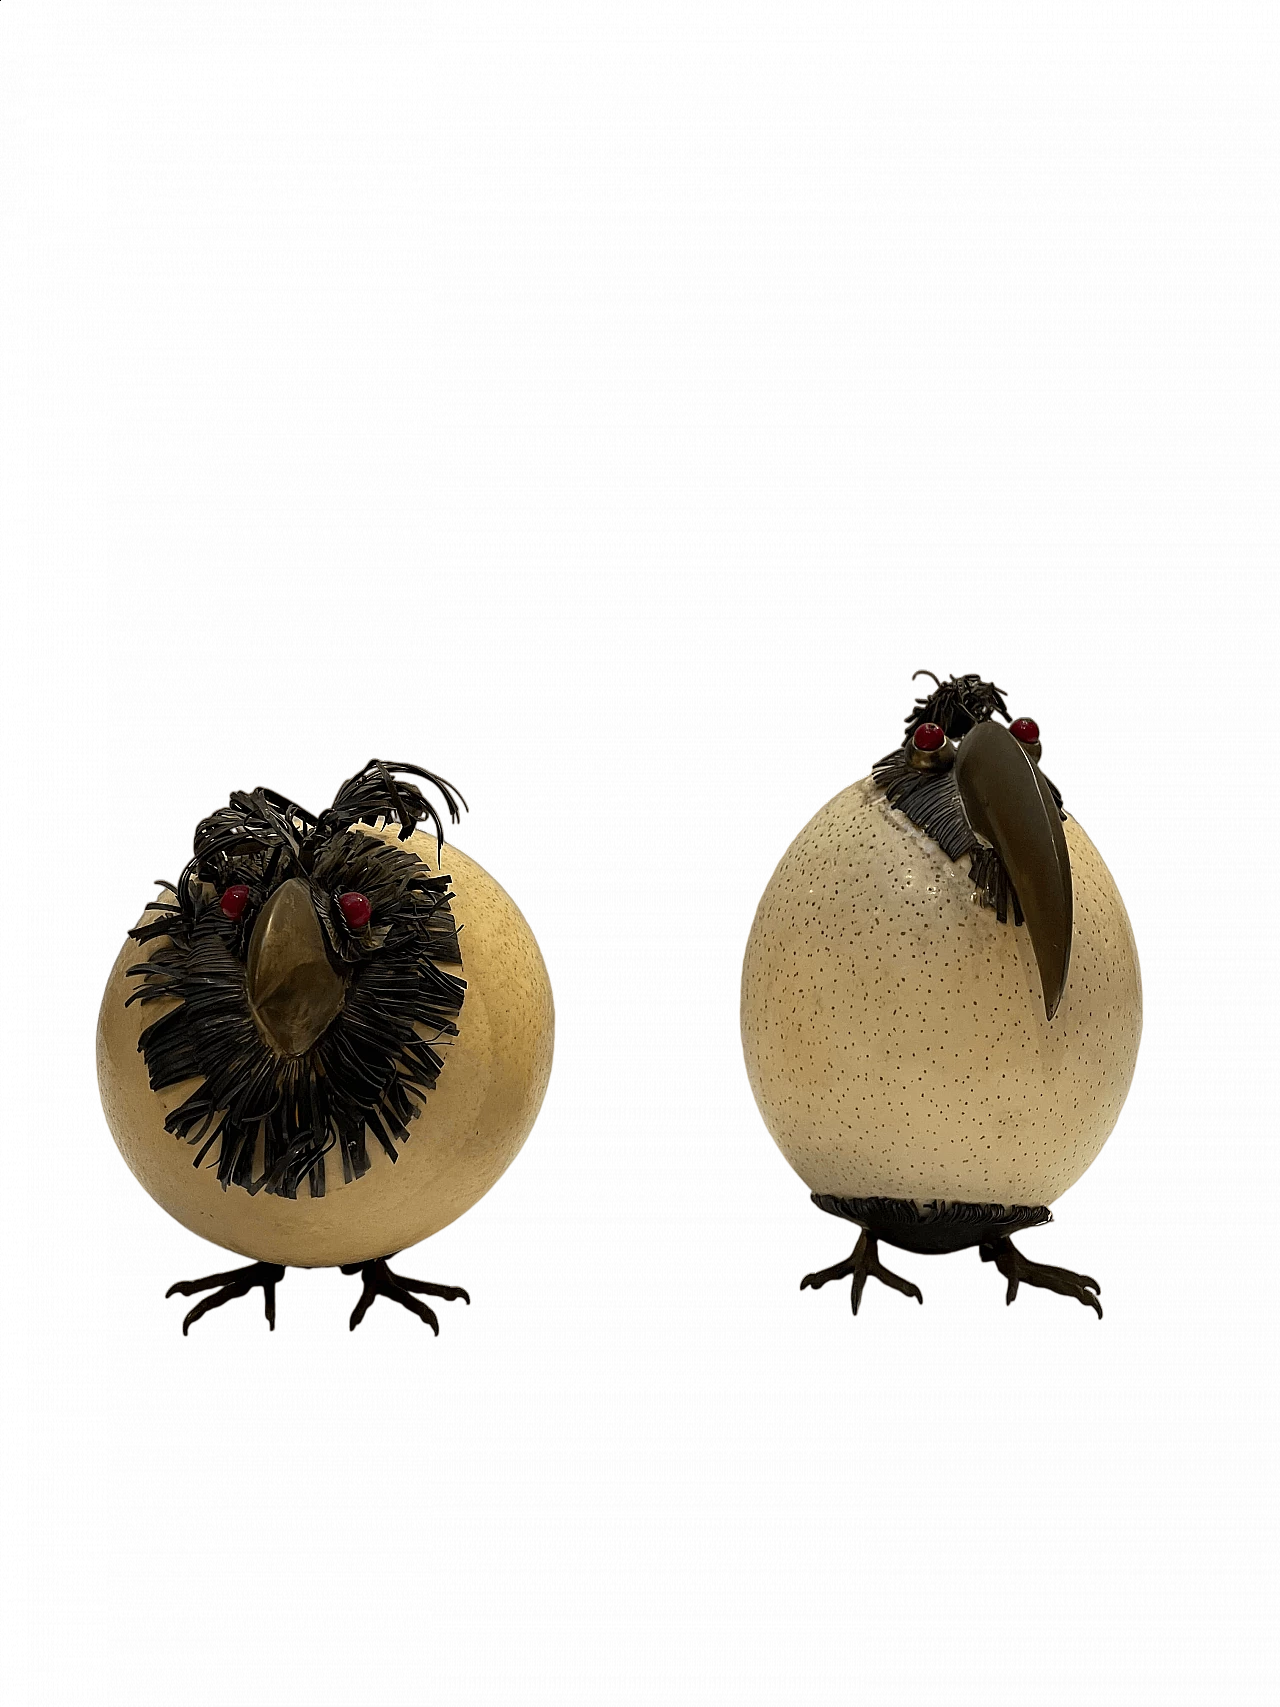 Ostrich eggs depicting caricature birds, late 1800s 10